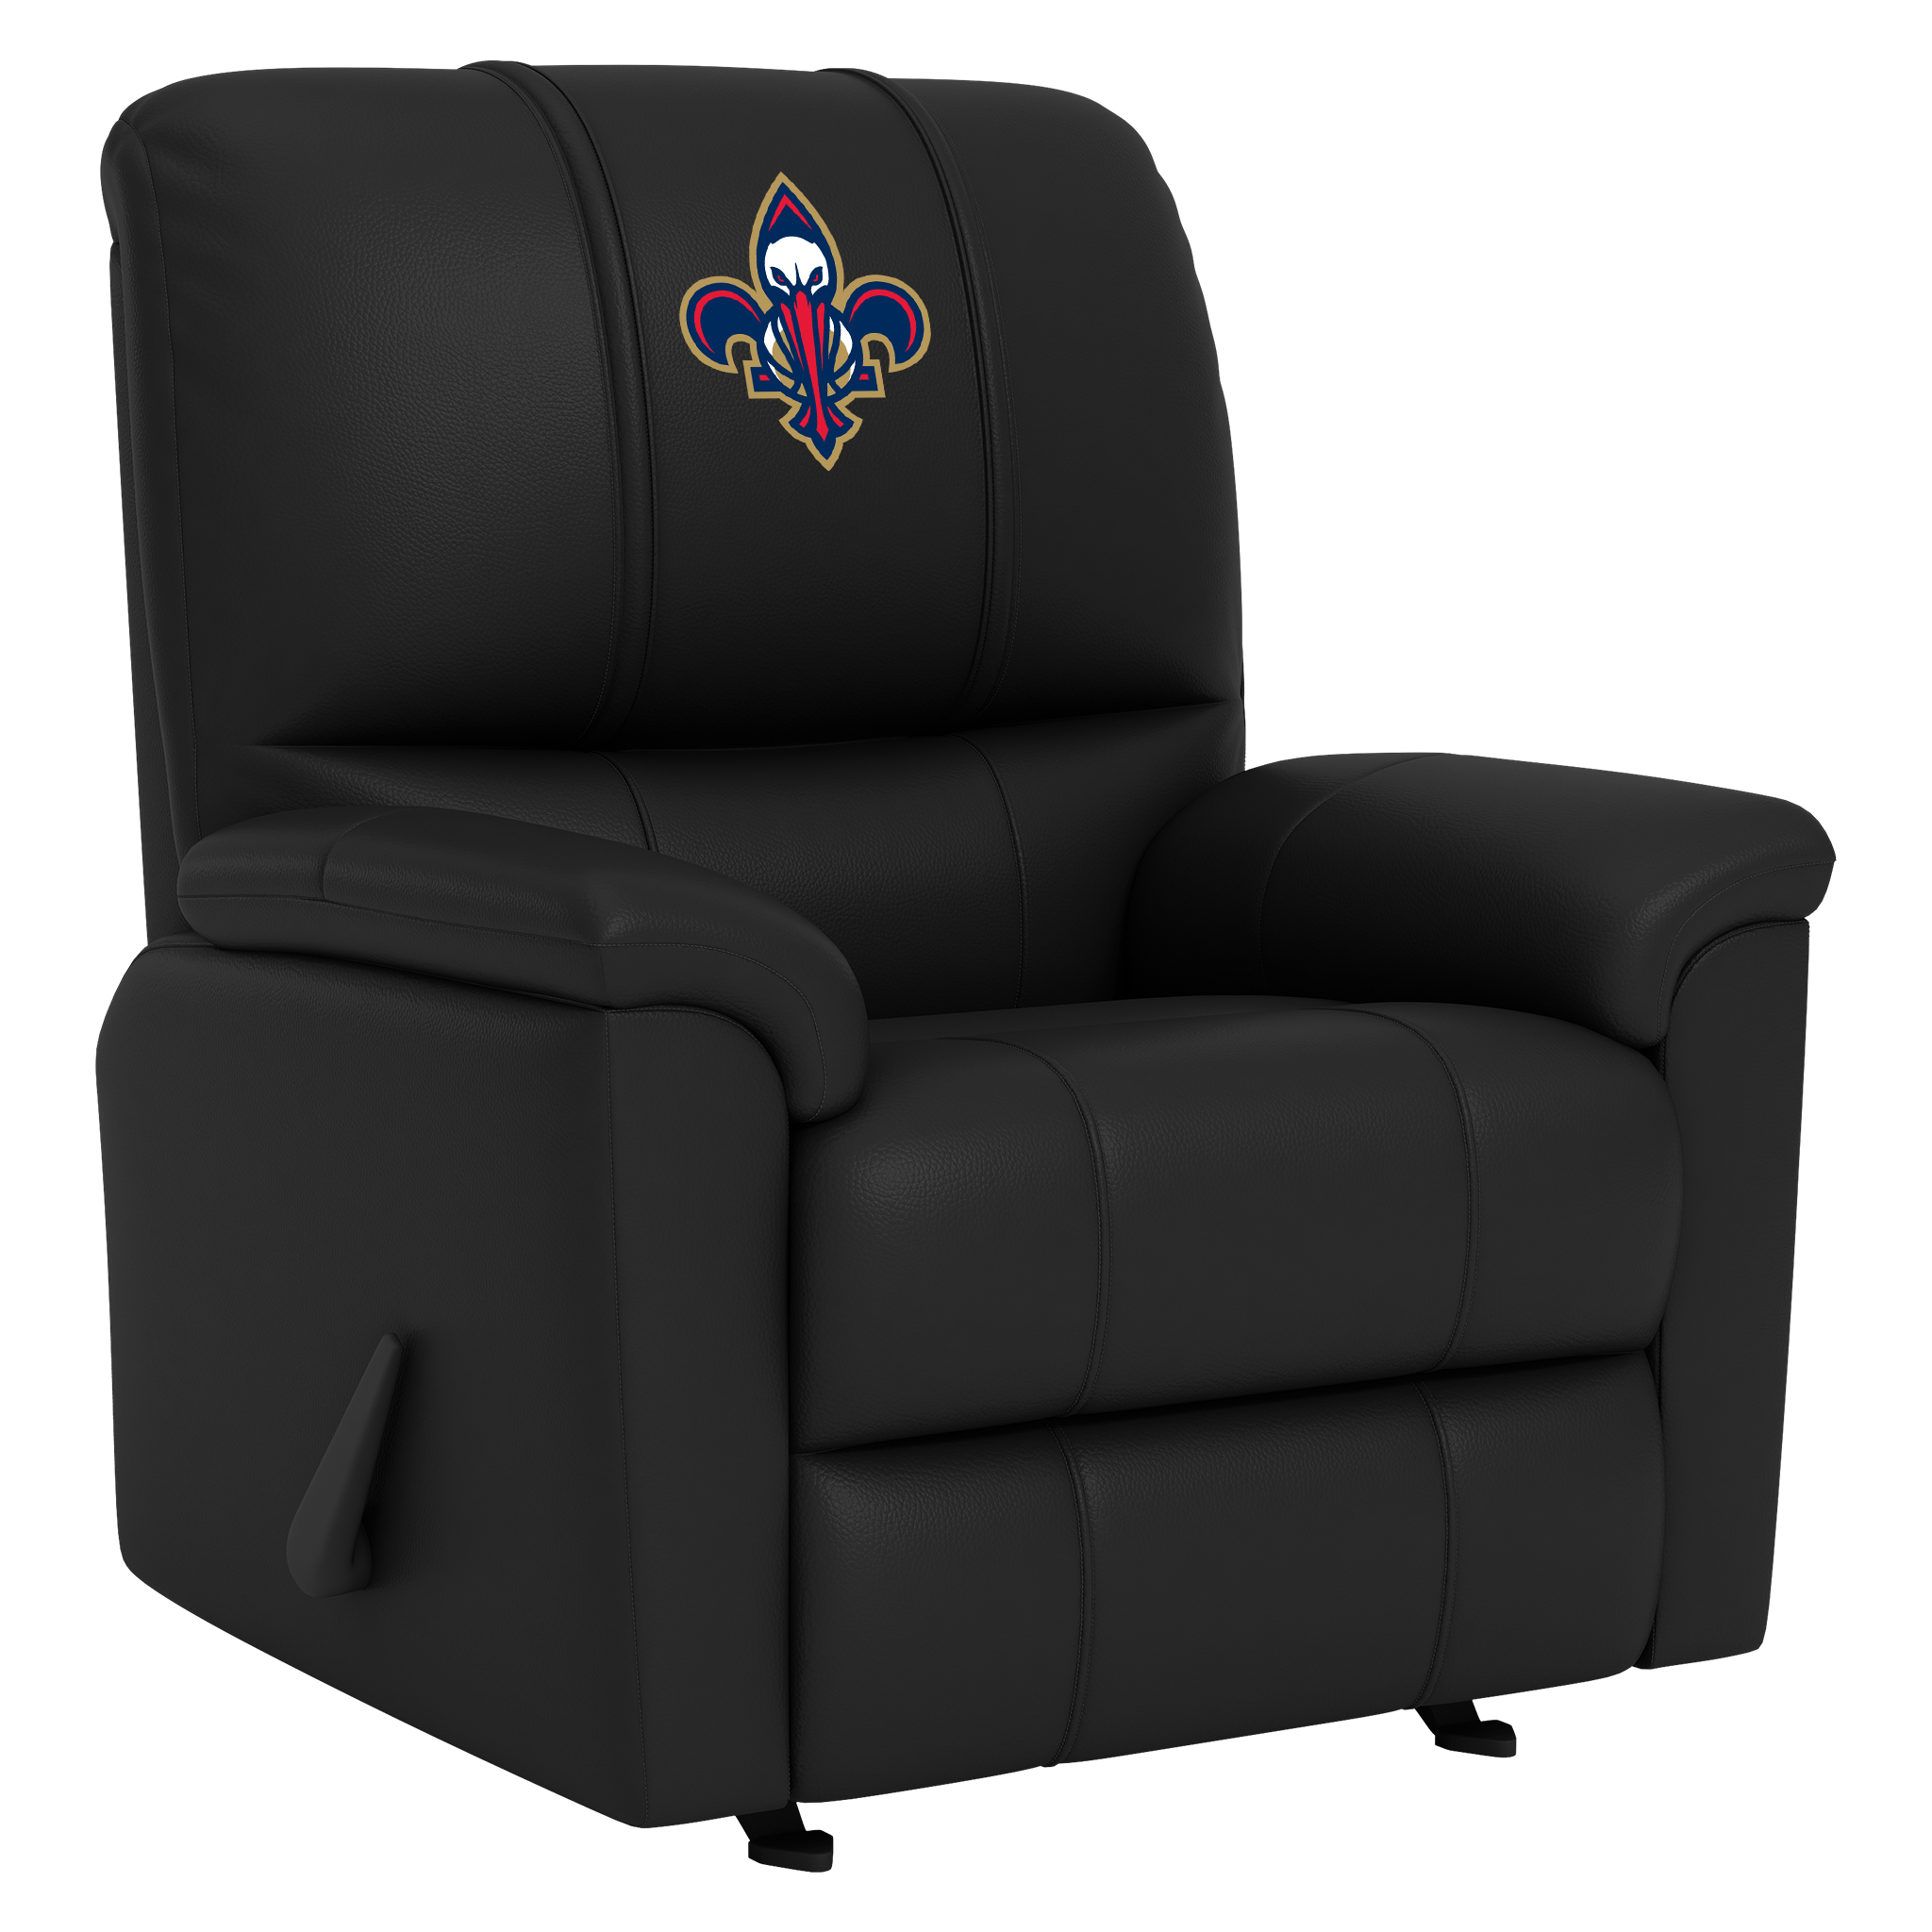 Memphis Grizzlies Silver Club Chair with Memphis Grizzlies Primary Logo